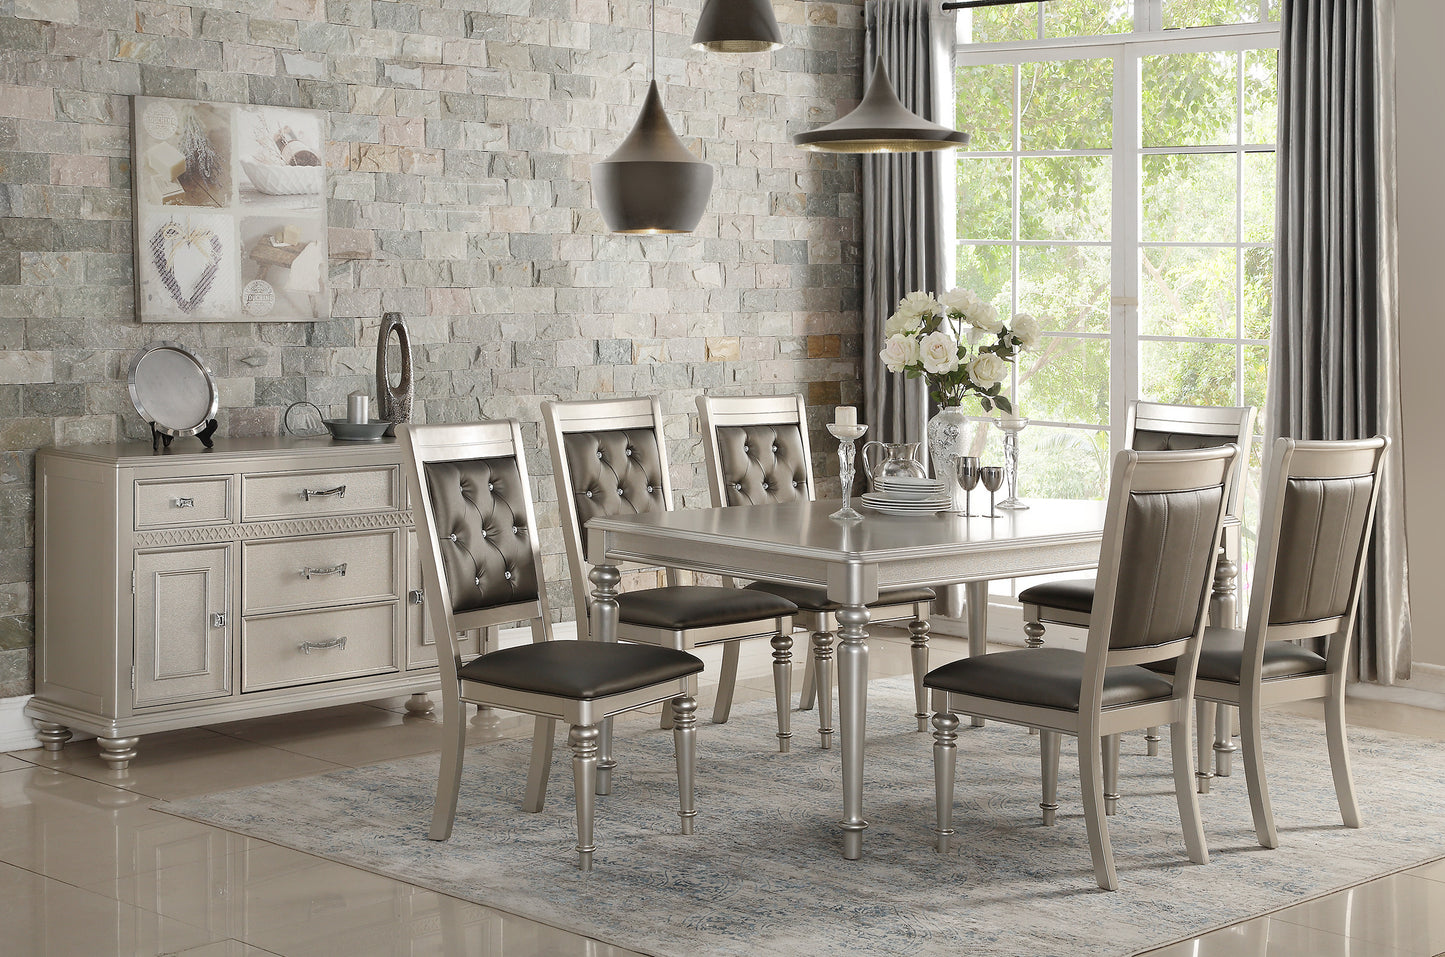 Luxury Silver Accent Tufted Upholstered Chairs Set of 2 Dining Side Chairs